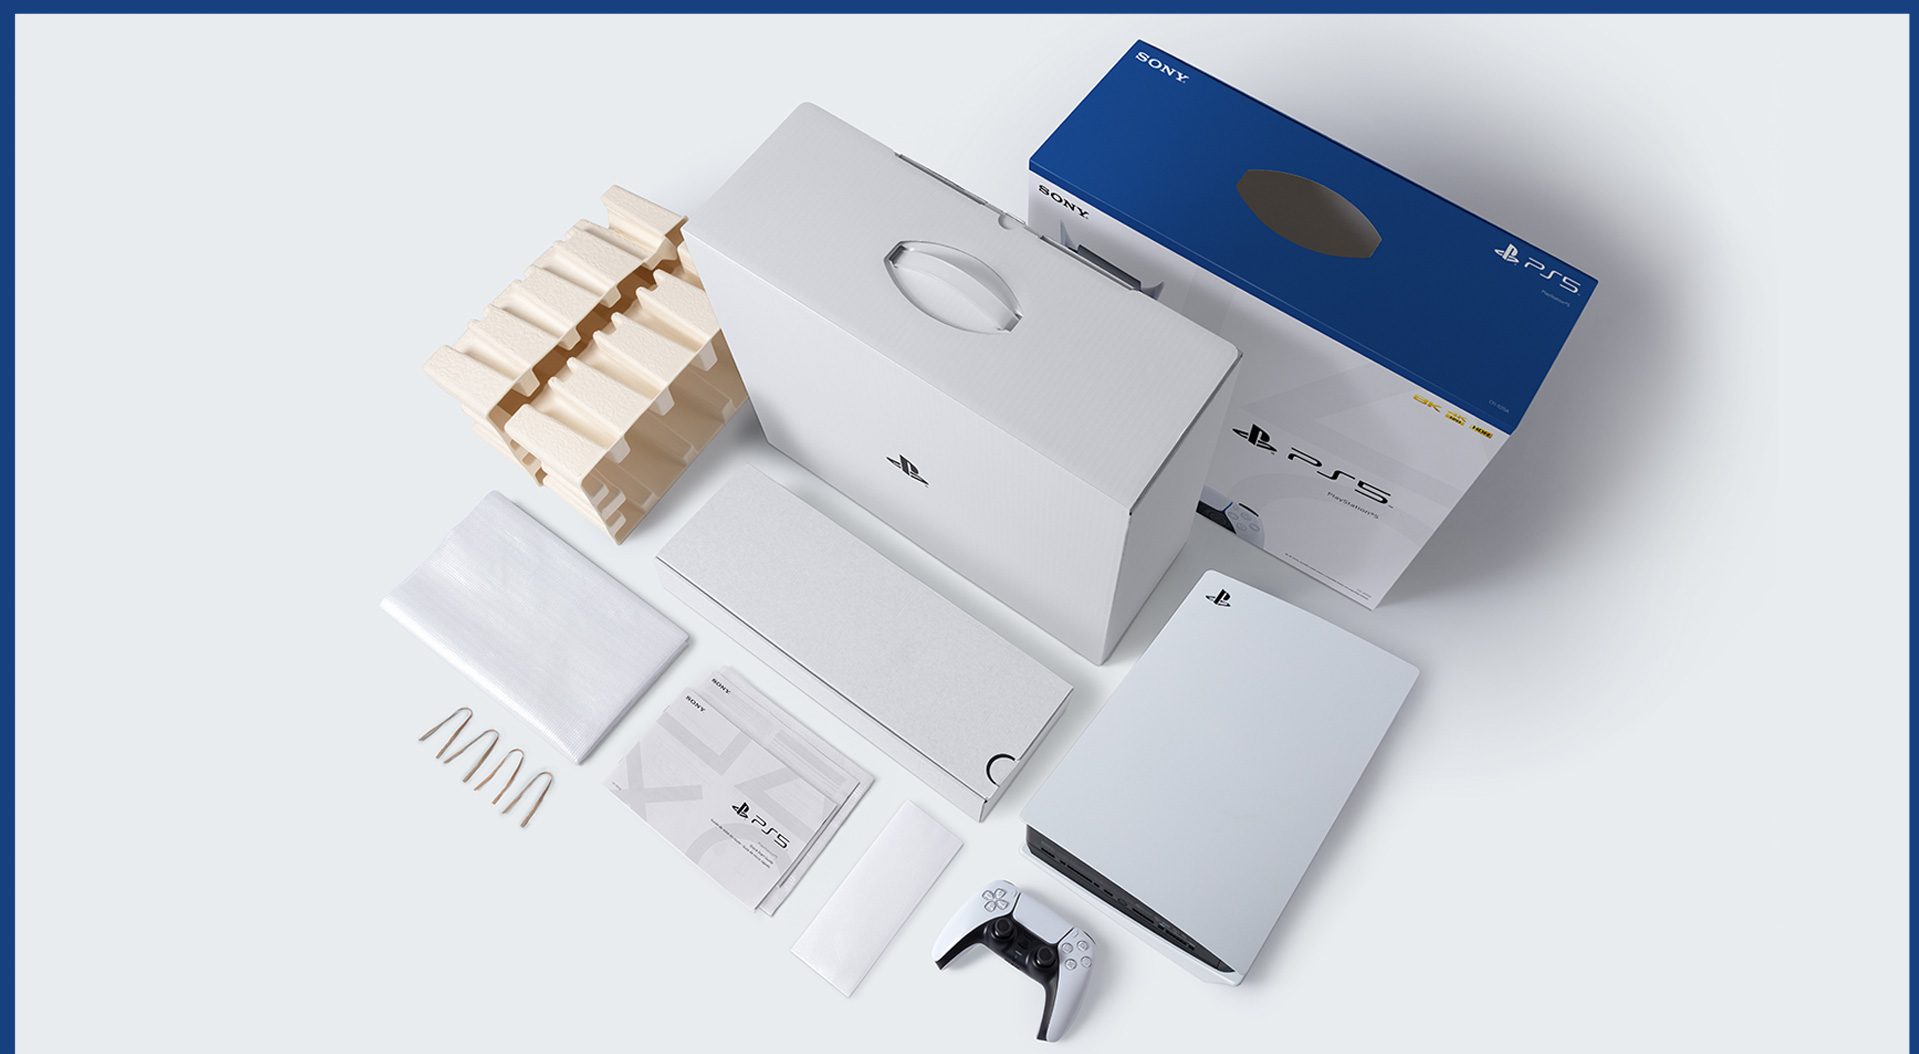 PlayStation 5 packaging on white